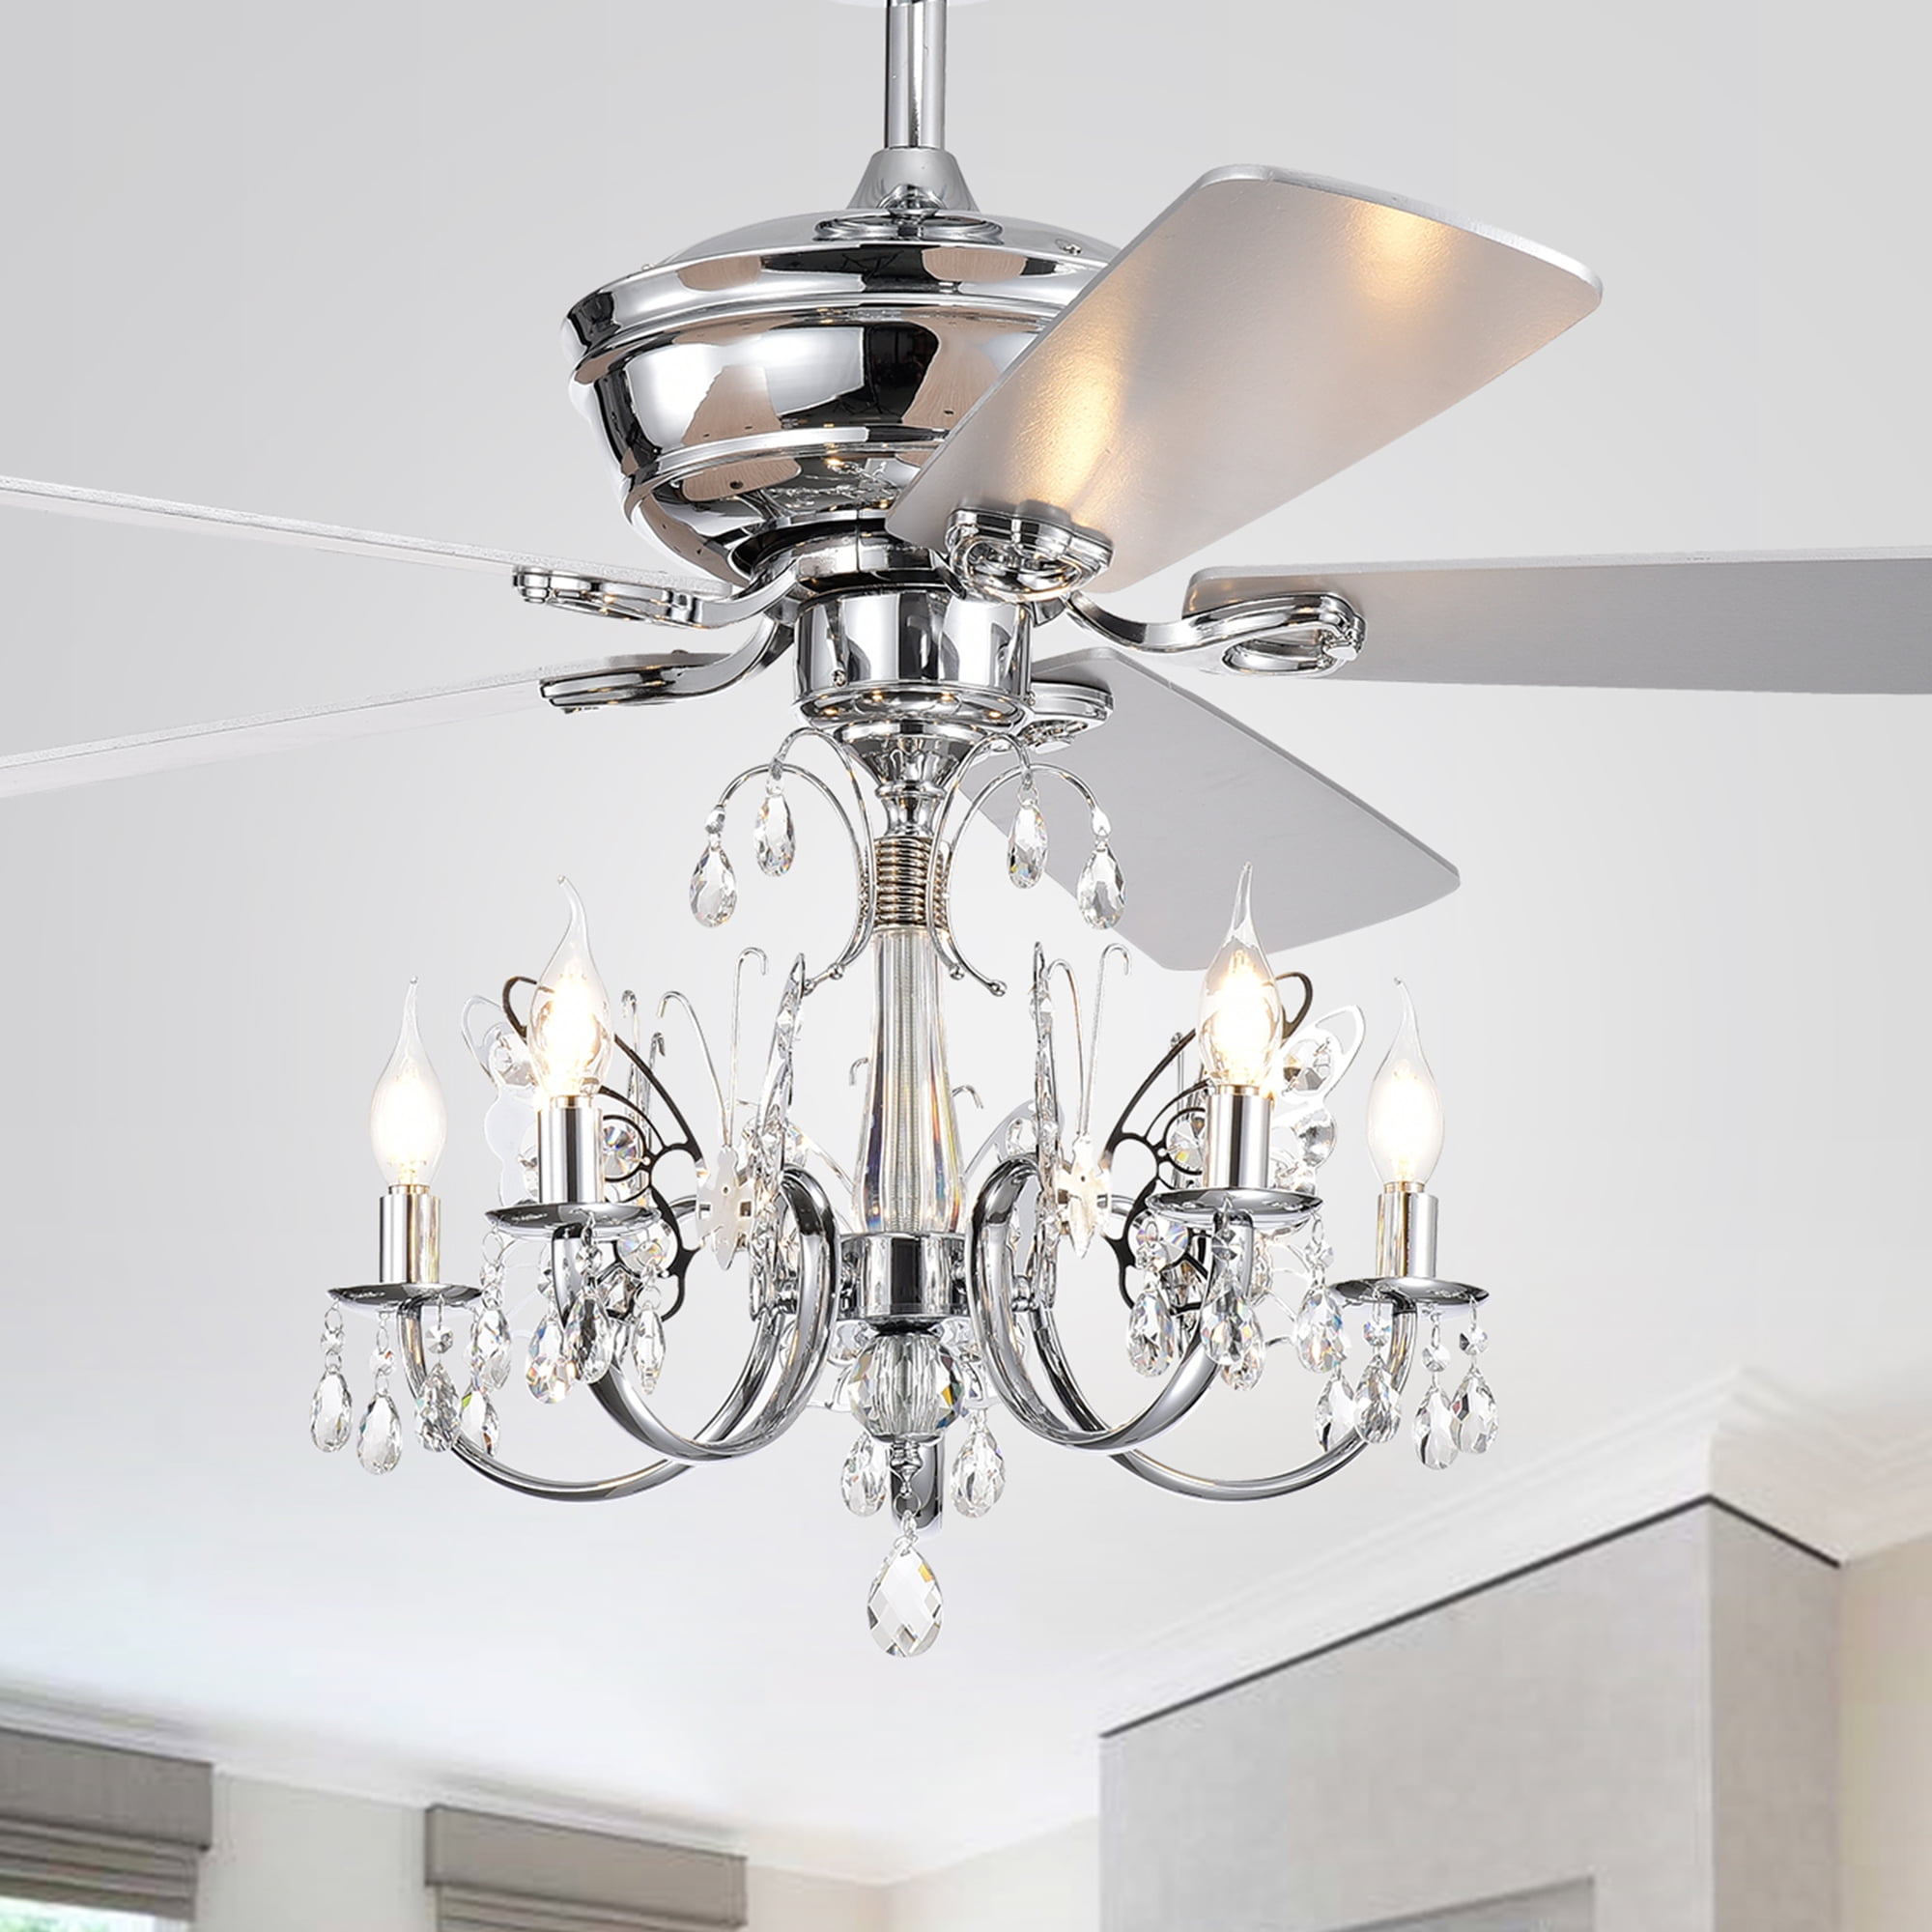 5 Light Chrome Lighted Ceiling Fan, Antique White Ceiling Fan With Chandelier